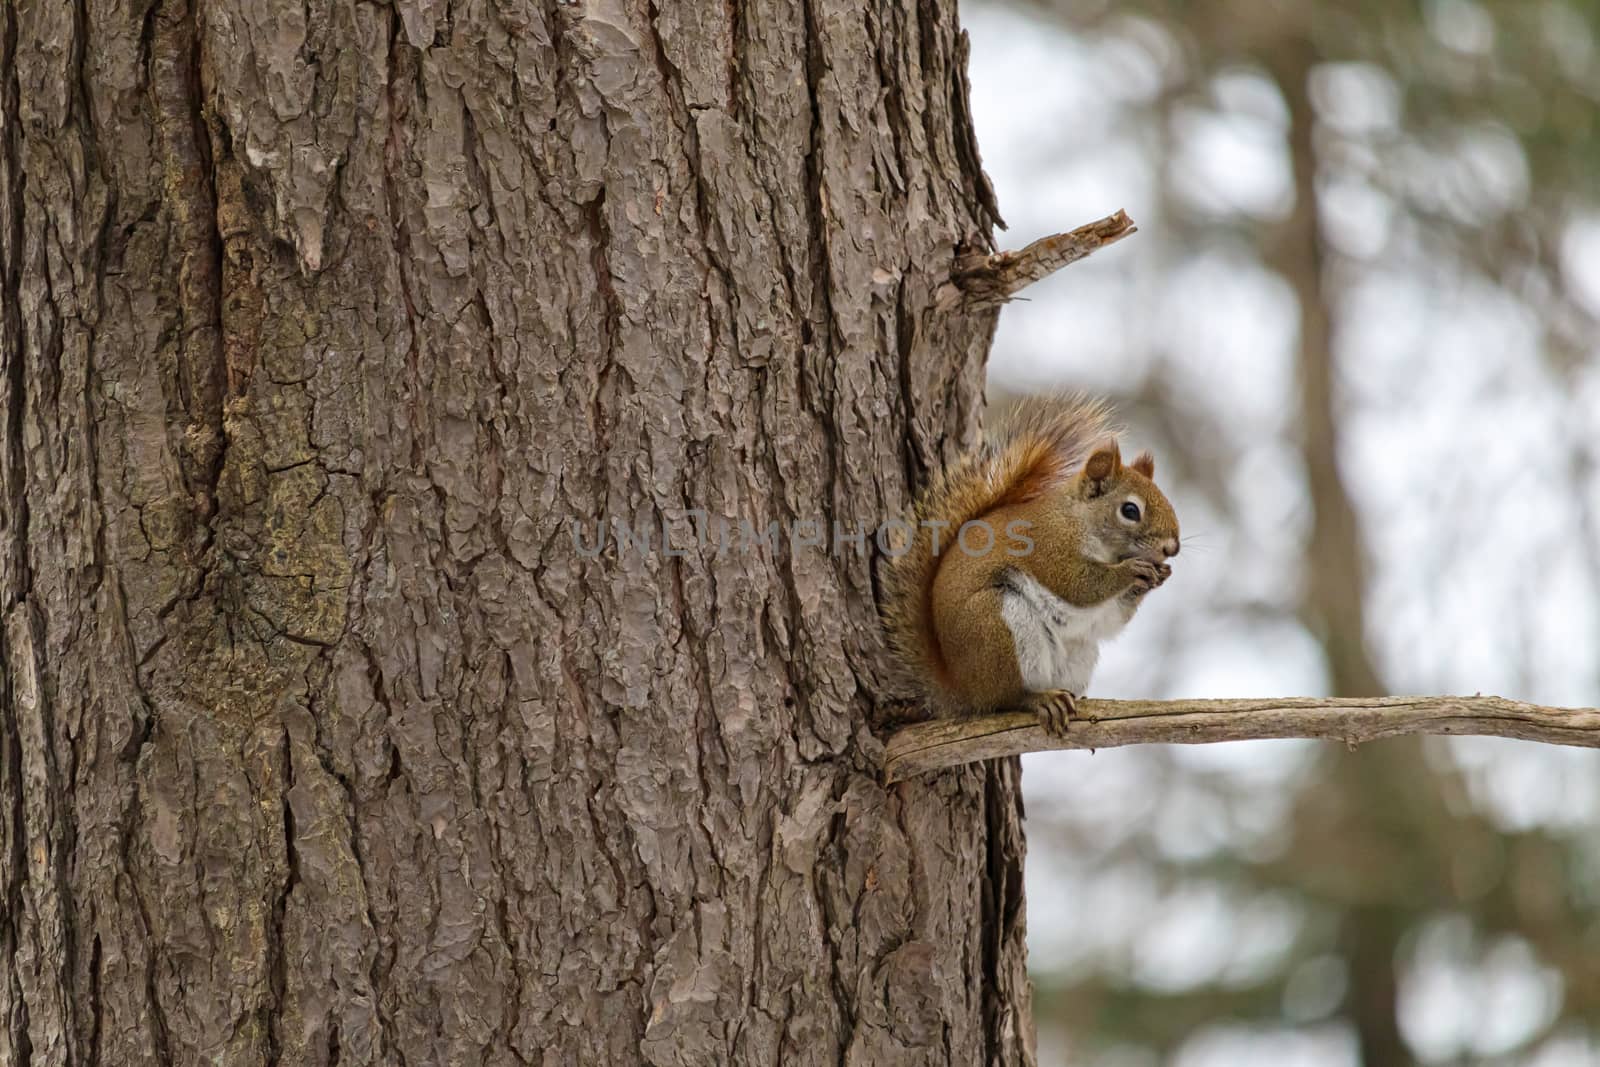 Red squirrel nibbles on seed on tree branch by colintemple